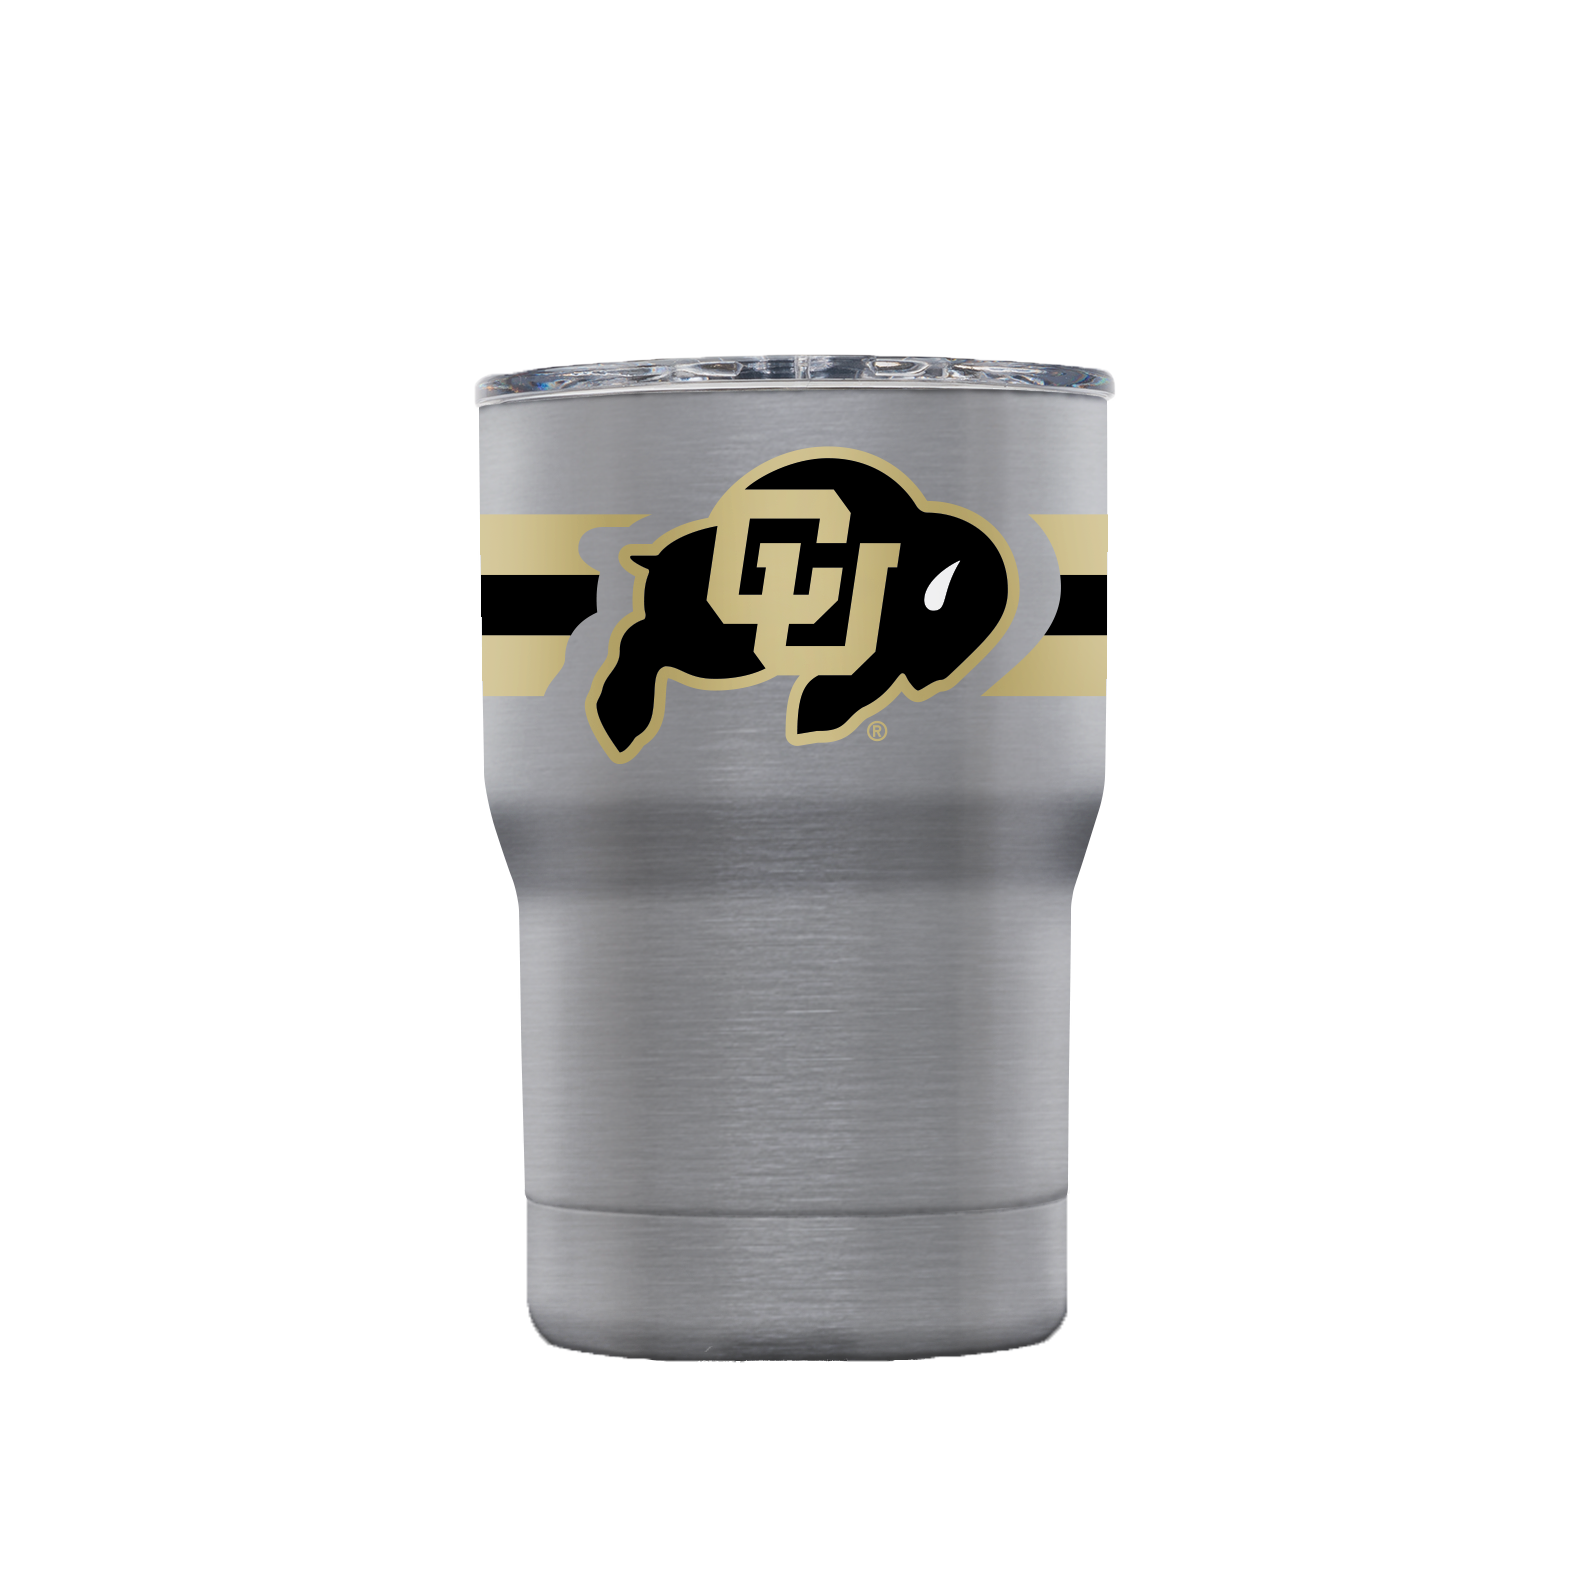 Colorado Jacket 2.0 Stainless Steel Can-Bottle Holder